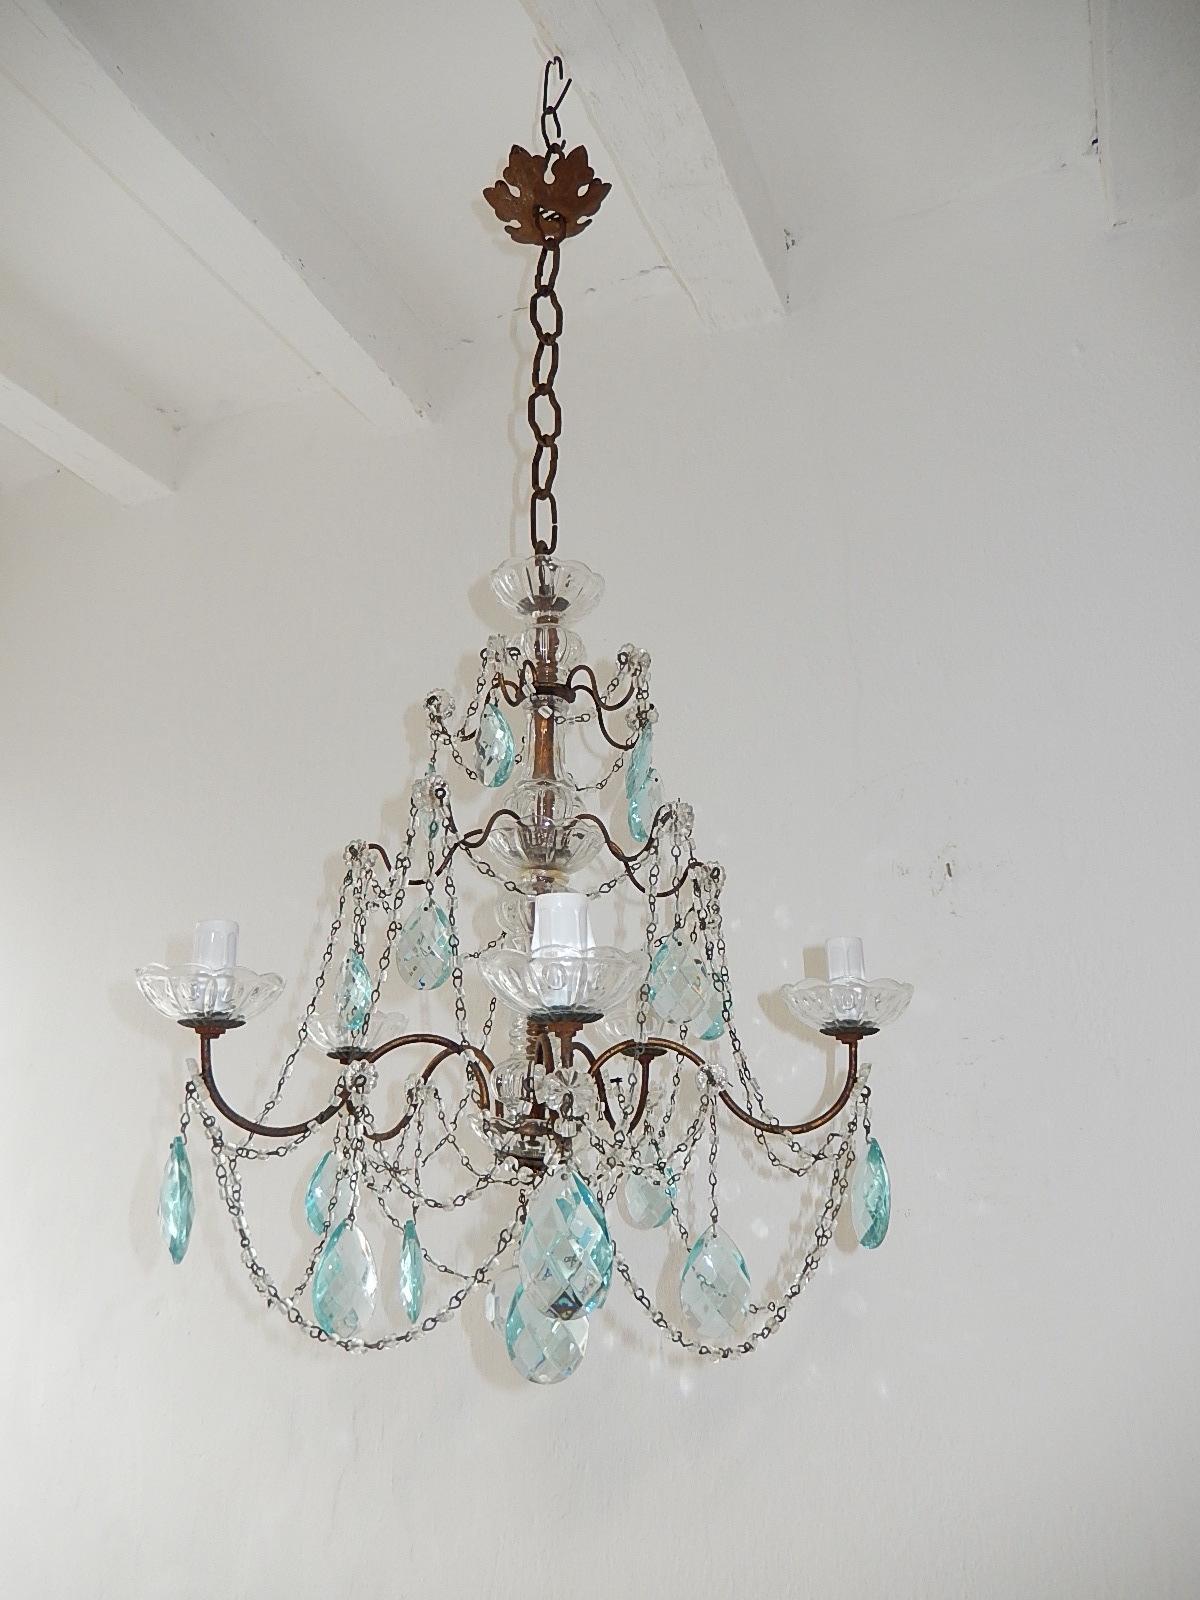 French 3 Tier Aqua Blue Rare Prisms Crystal Murano Chandelier, circa 1920 In Good Condition For Sale In Firenze, Toscana